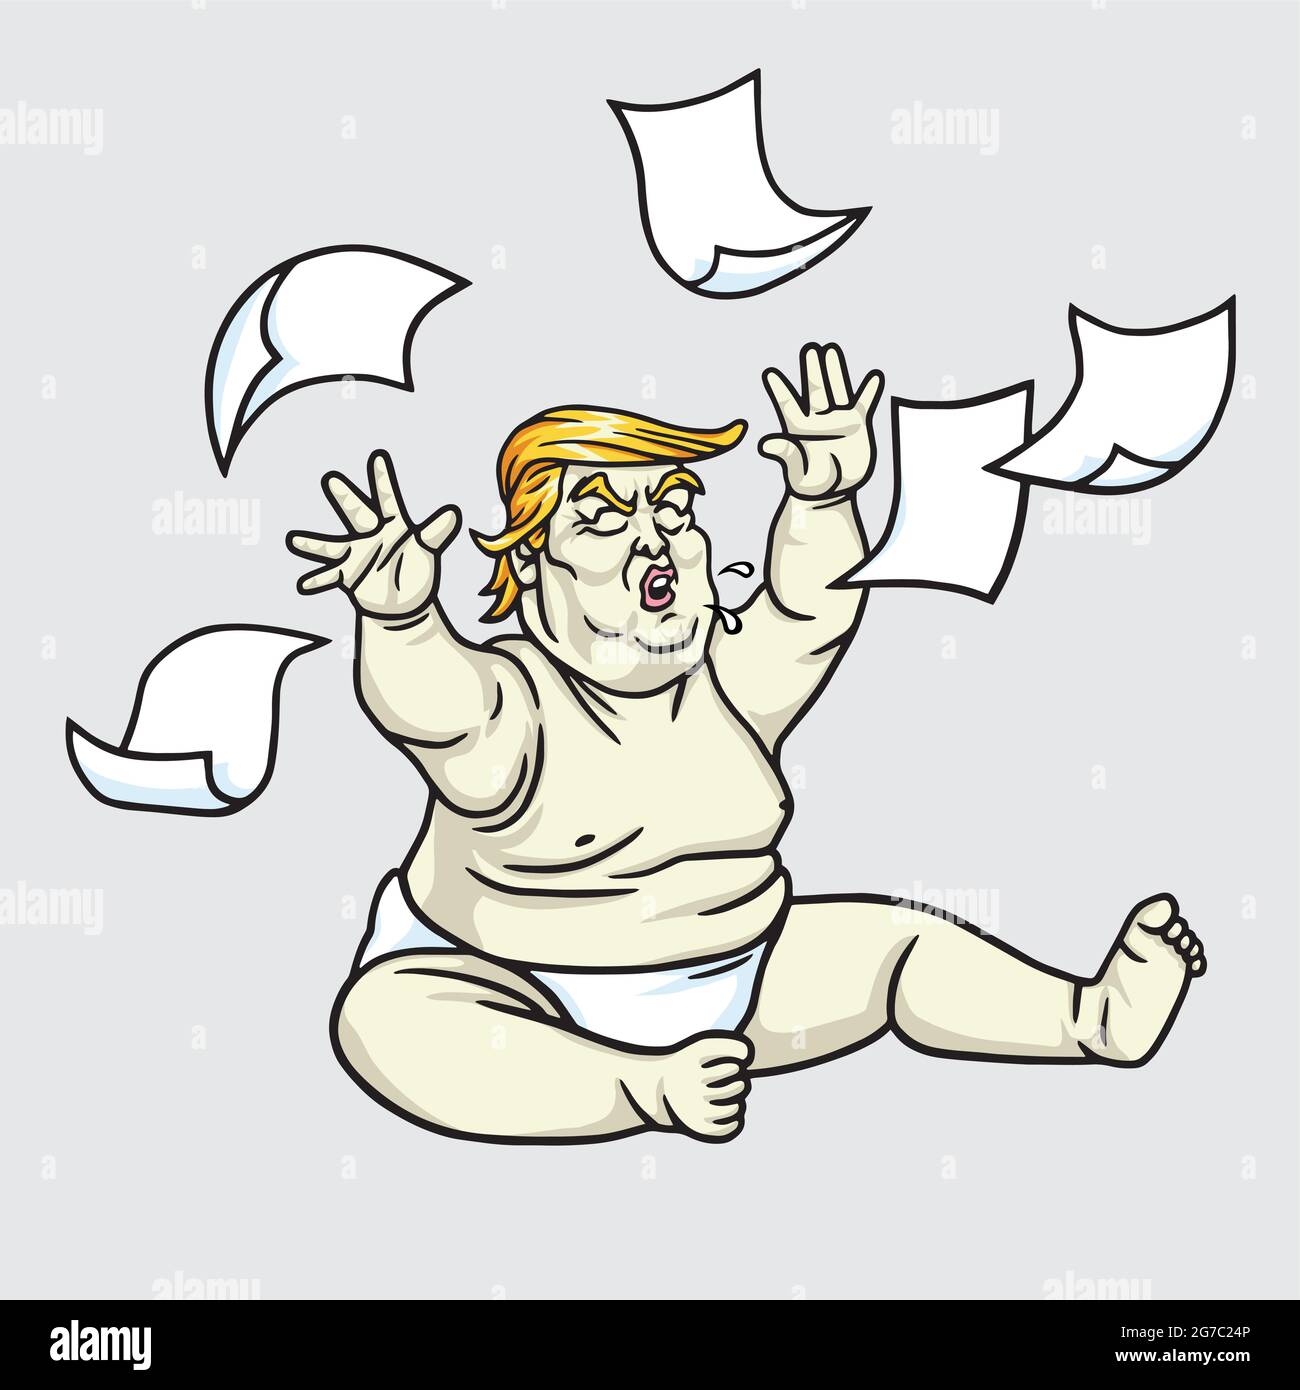 Donald Trump the Big Baby with Messy Papers Cartoon Illustration Stock Vector